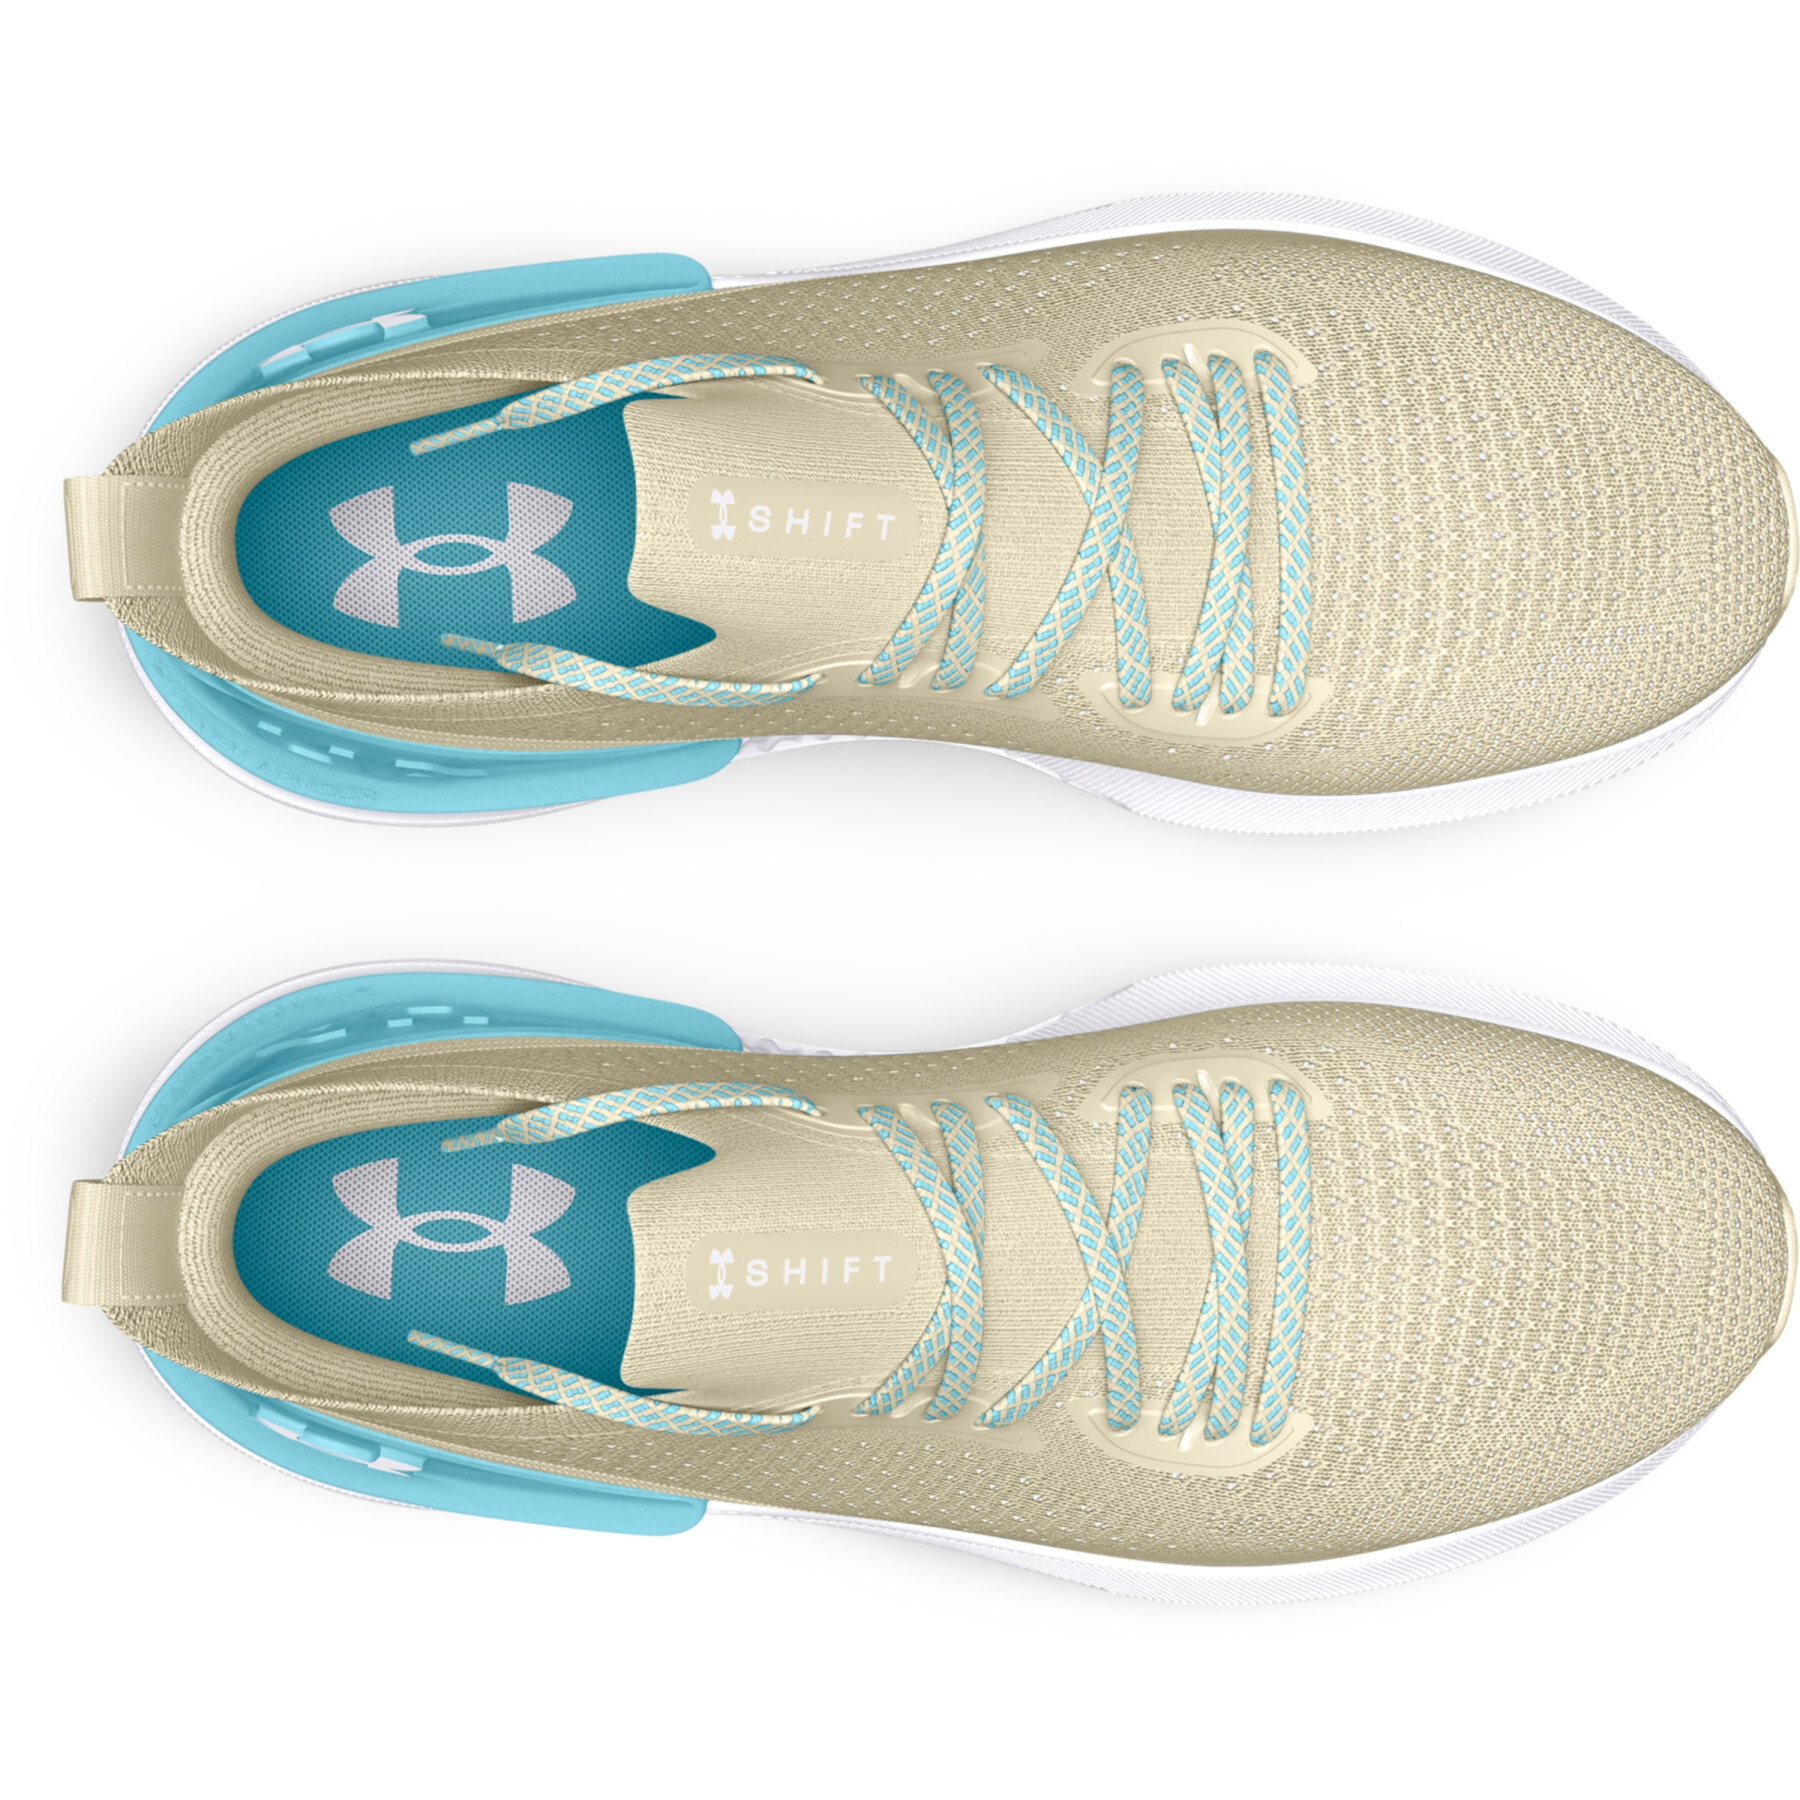 Zapatillas de running mujer Under Armour Charged Quicker